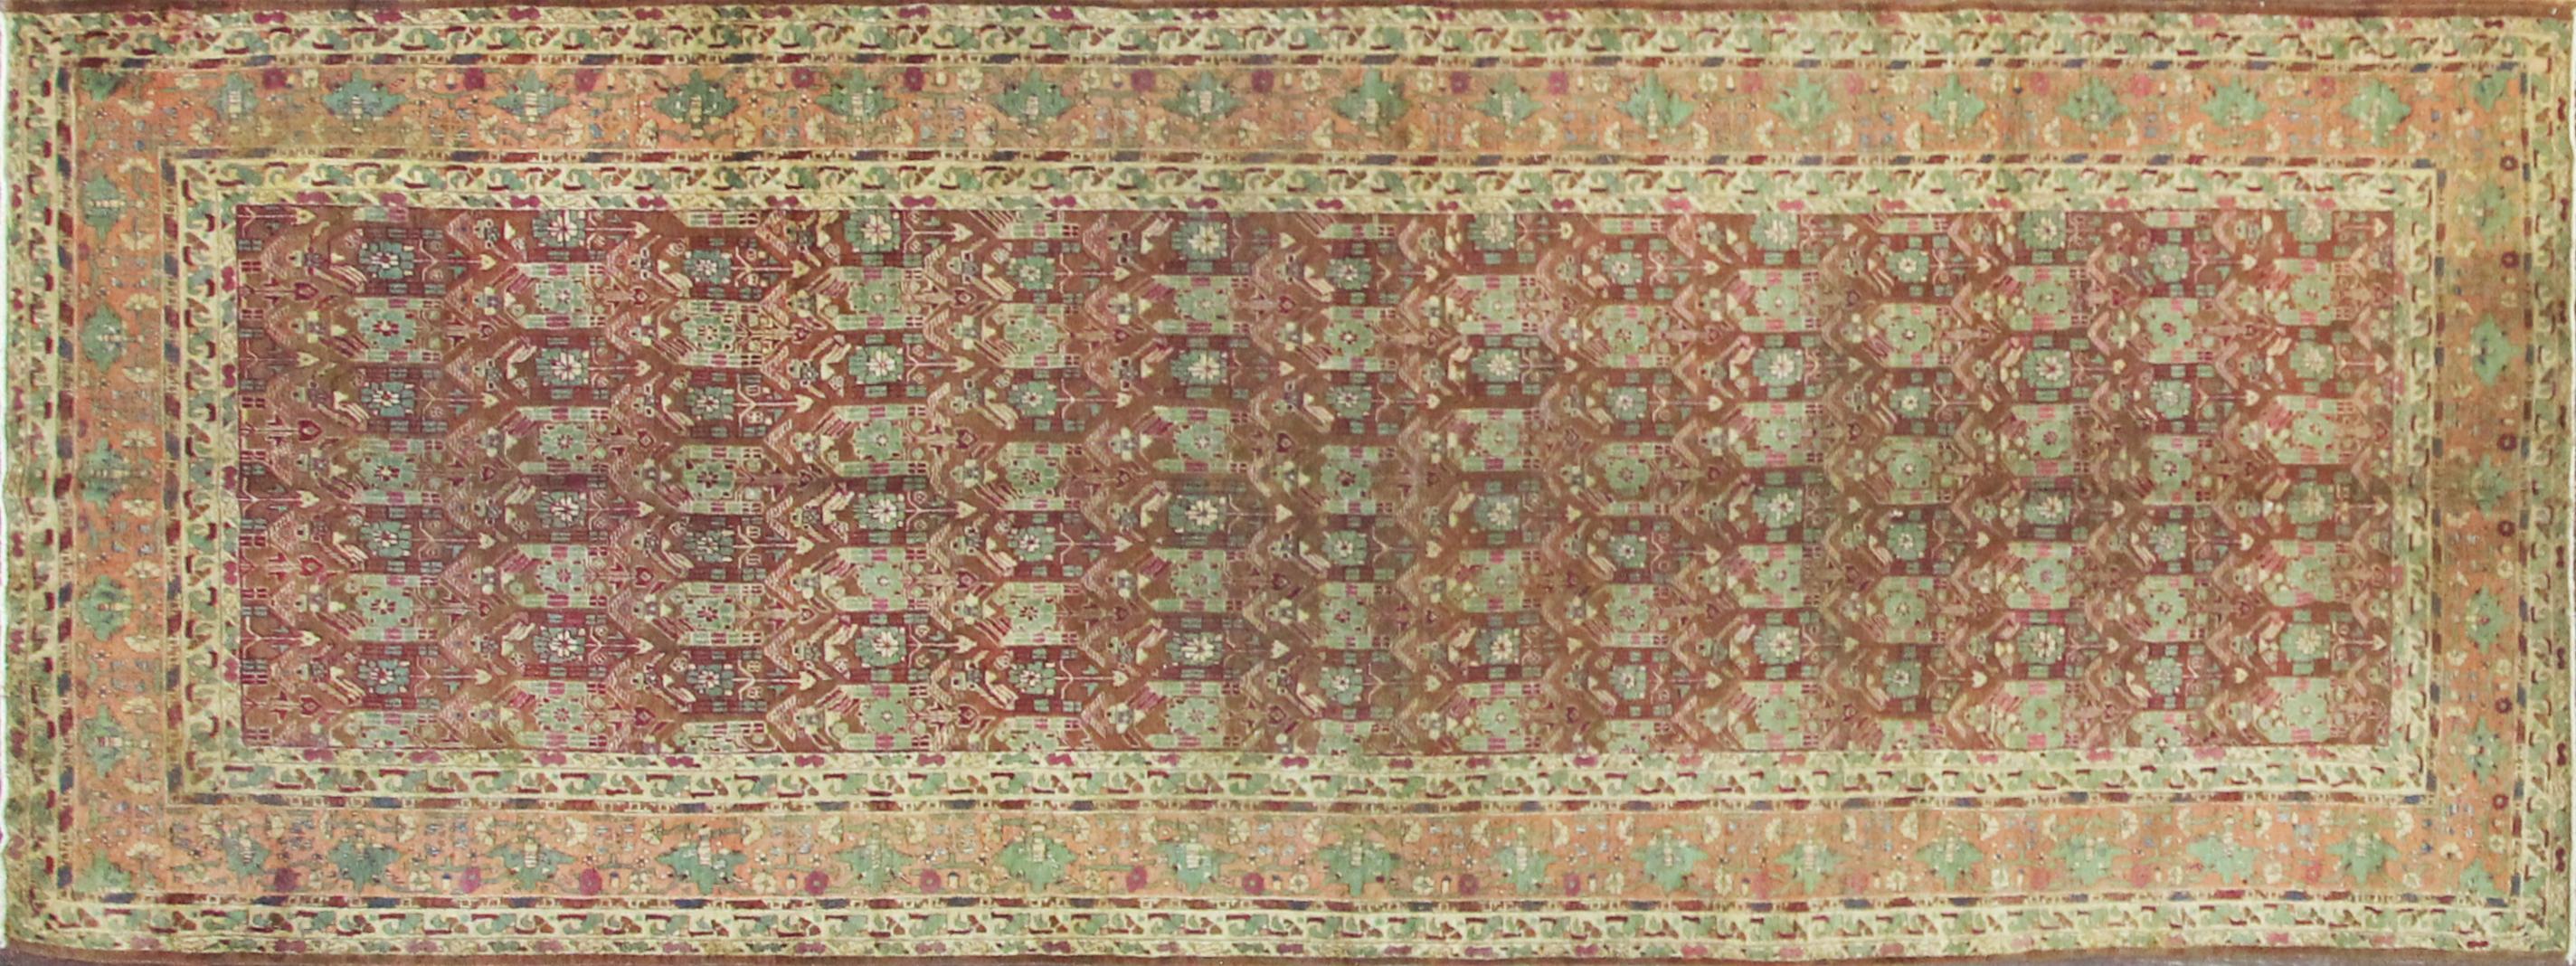 A gorgeous Agra gallery rug.
Agra is a large city and weaving district in North Central India that has been prolific in producing tightly knotted, decorative, floral rugs. Antique Agra rugs are renowned for their beauty of color, elegance of